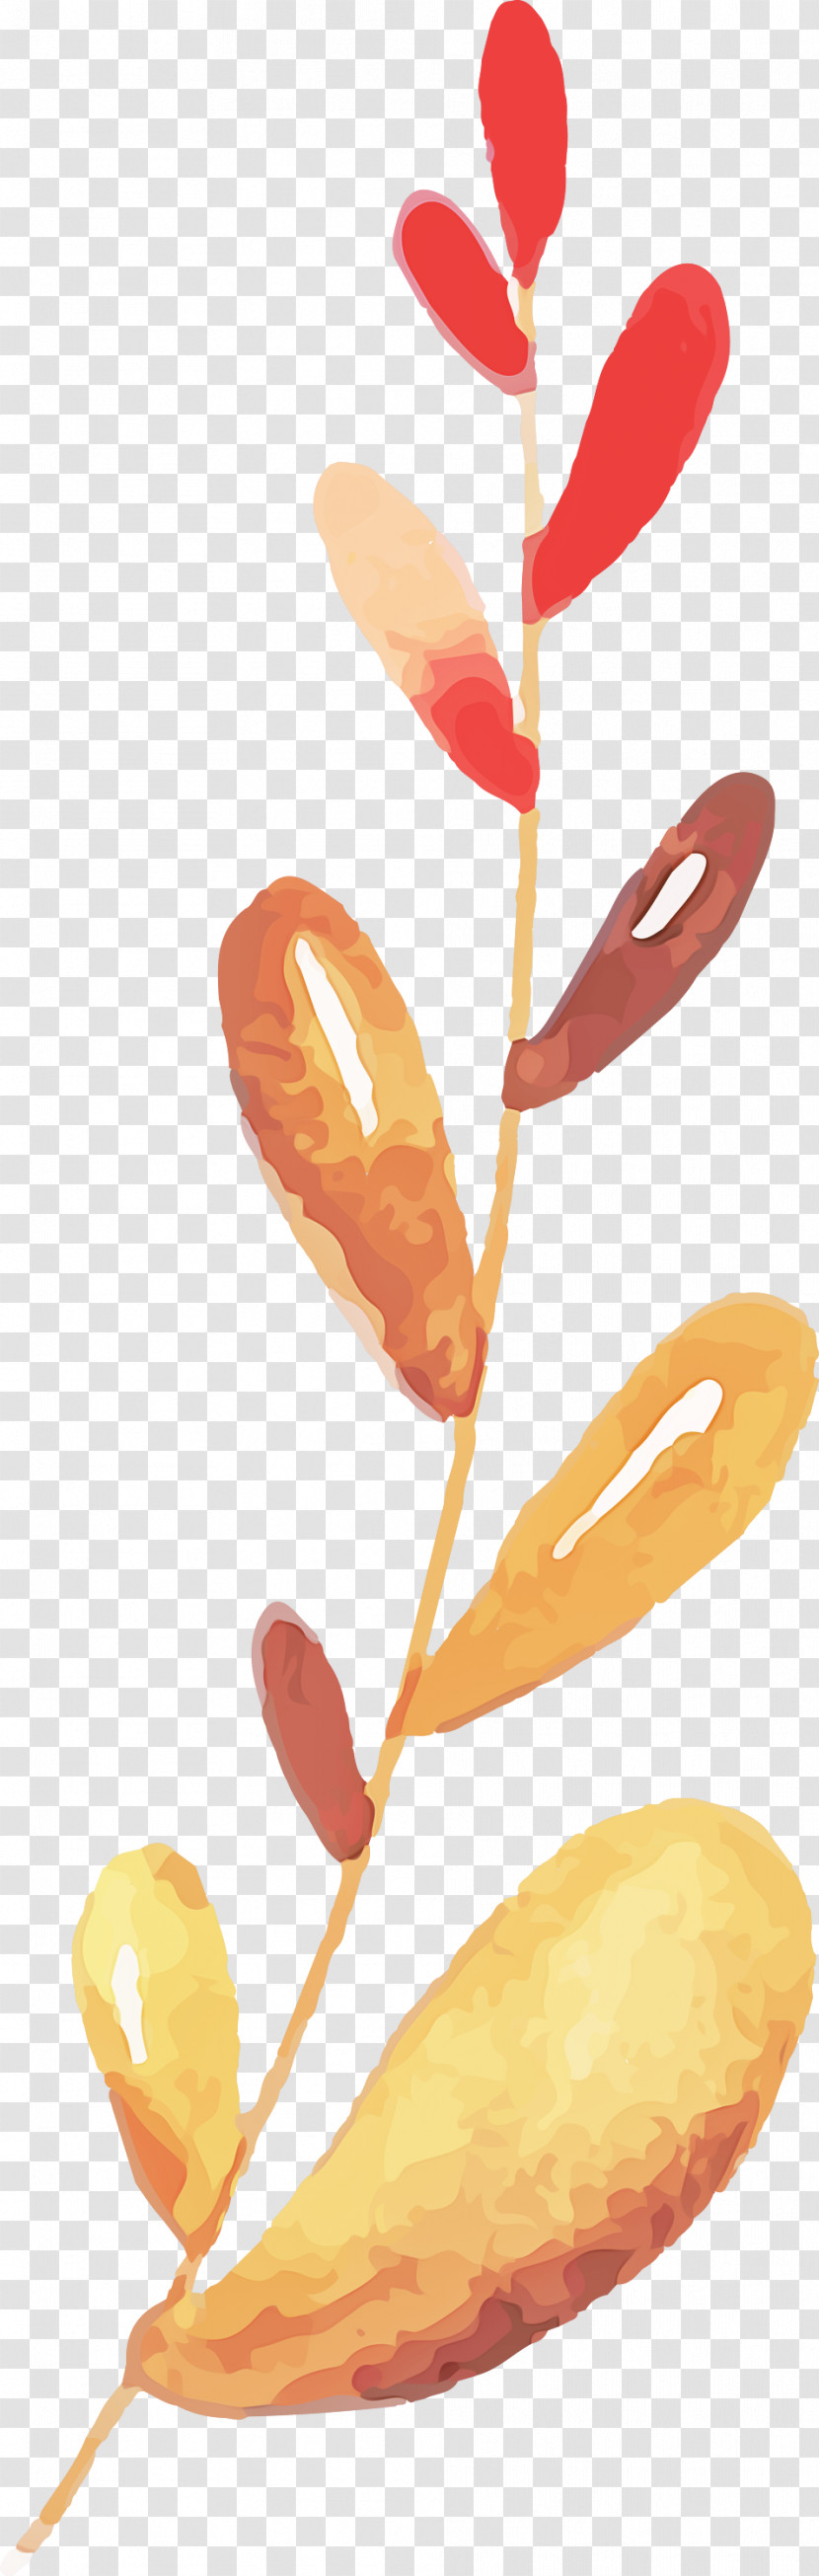 Icon Watercolor Painting Leaf Transparent PNG